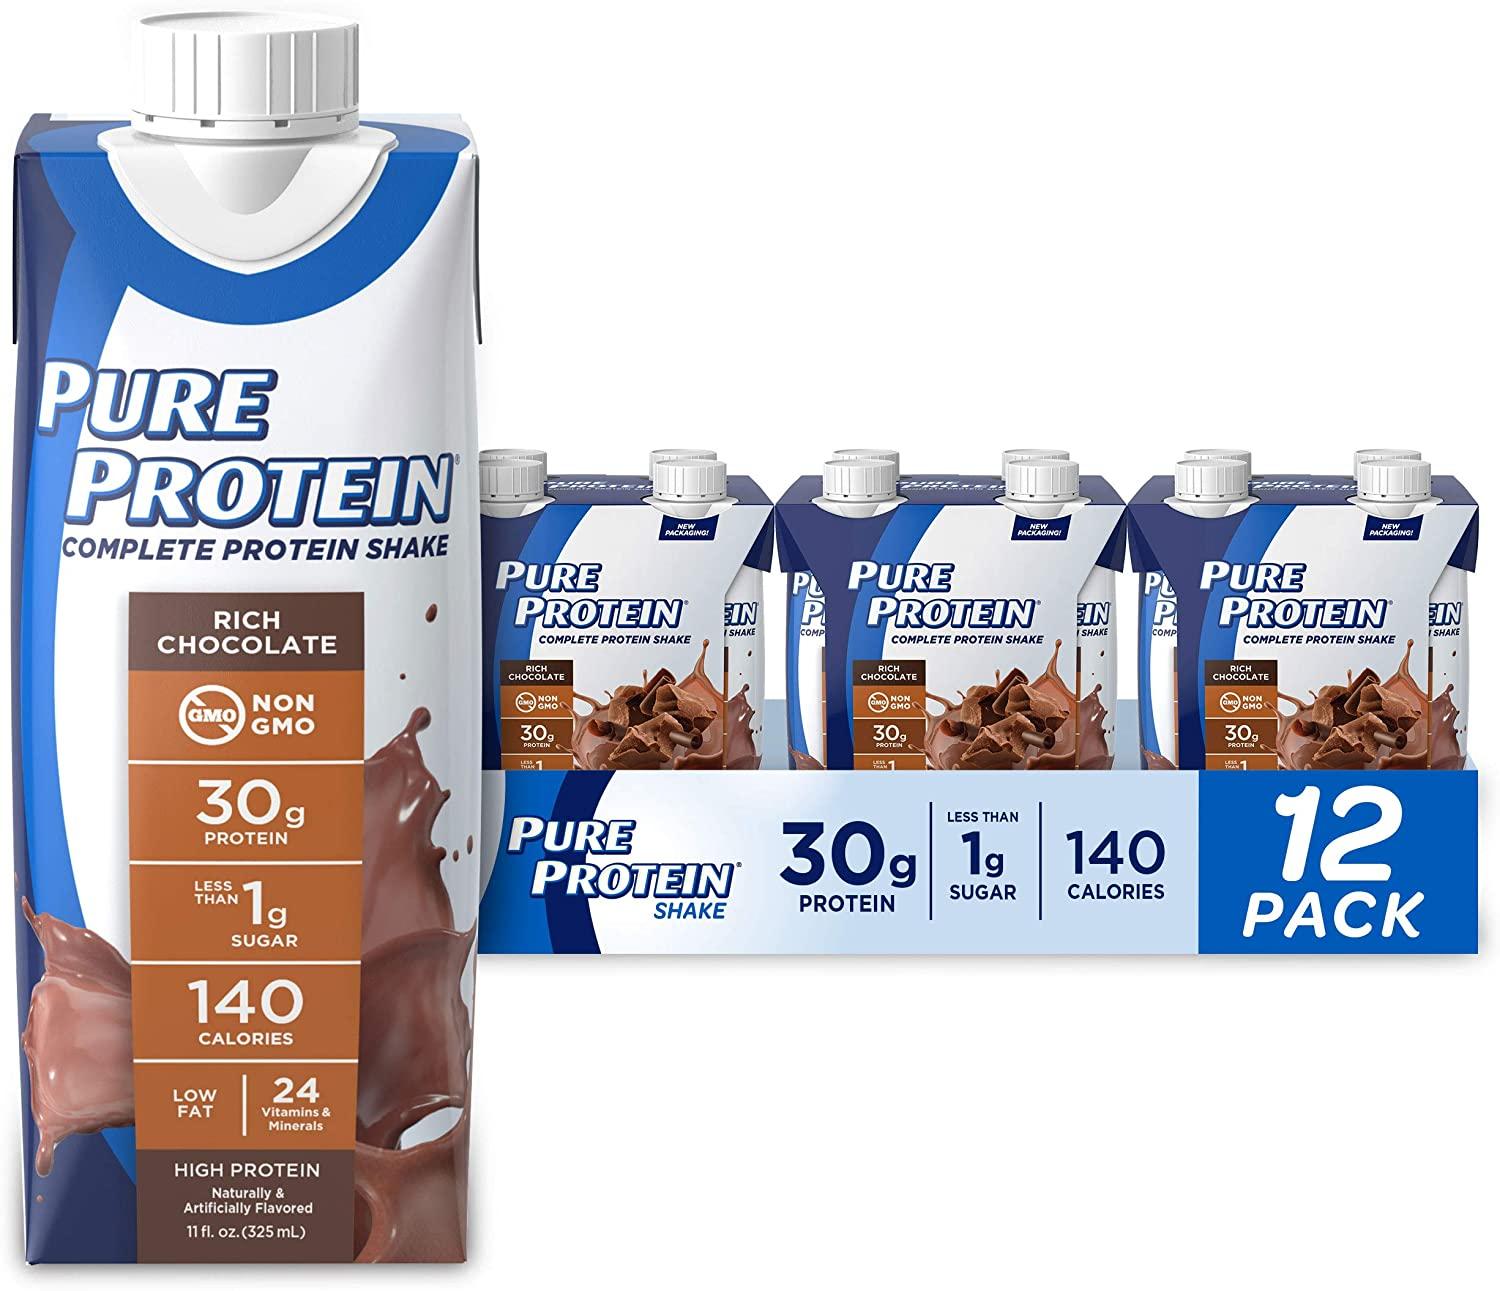 12 Pure Protein Complete Ready to Drink Protein Shake for $10.76 Shipped